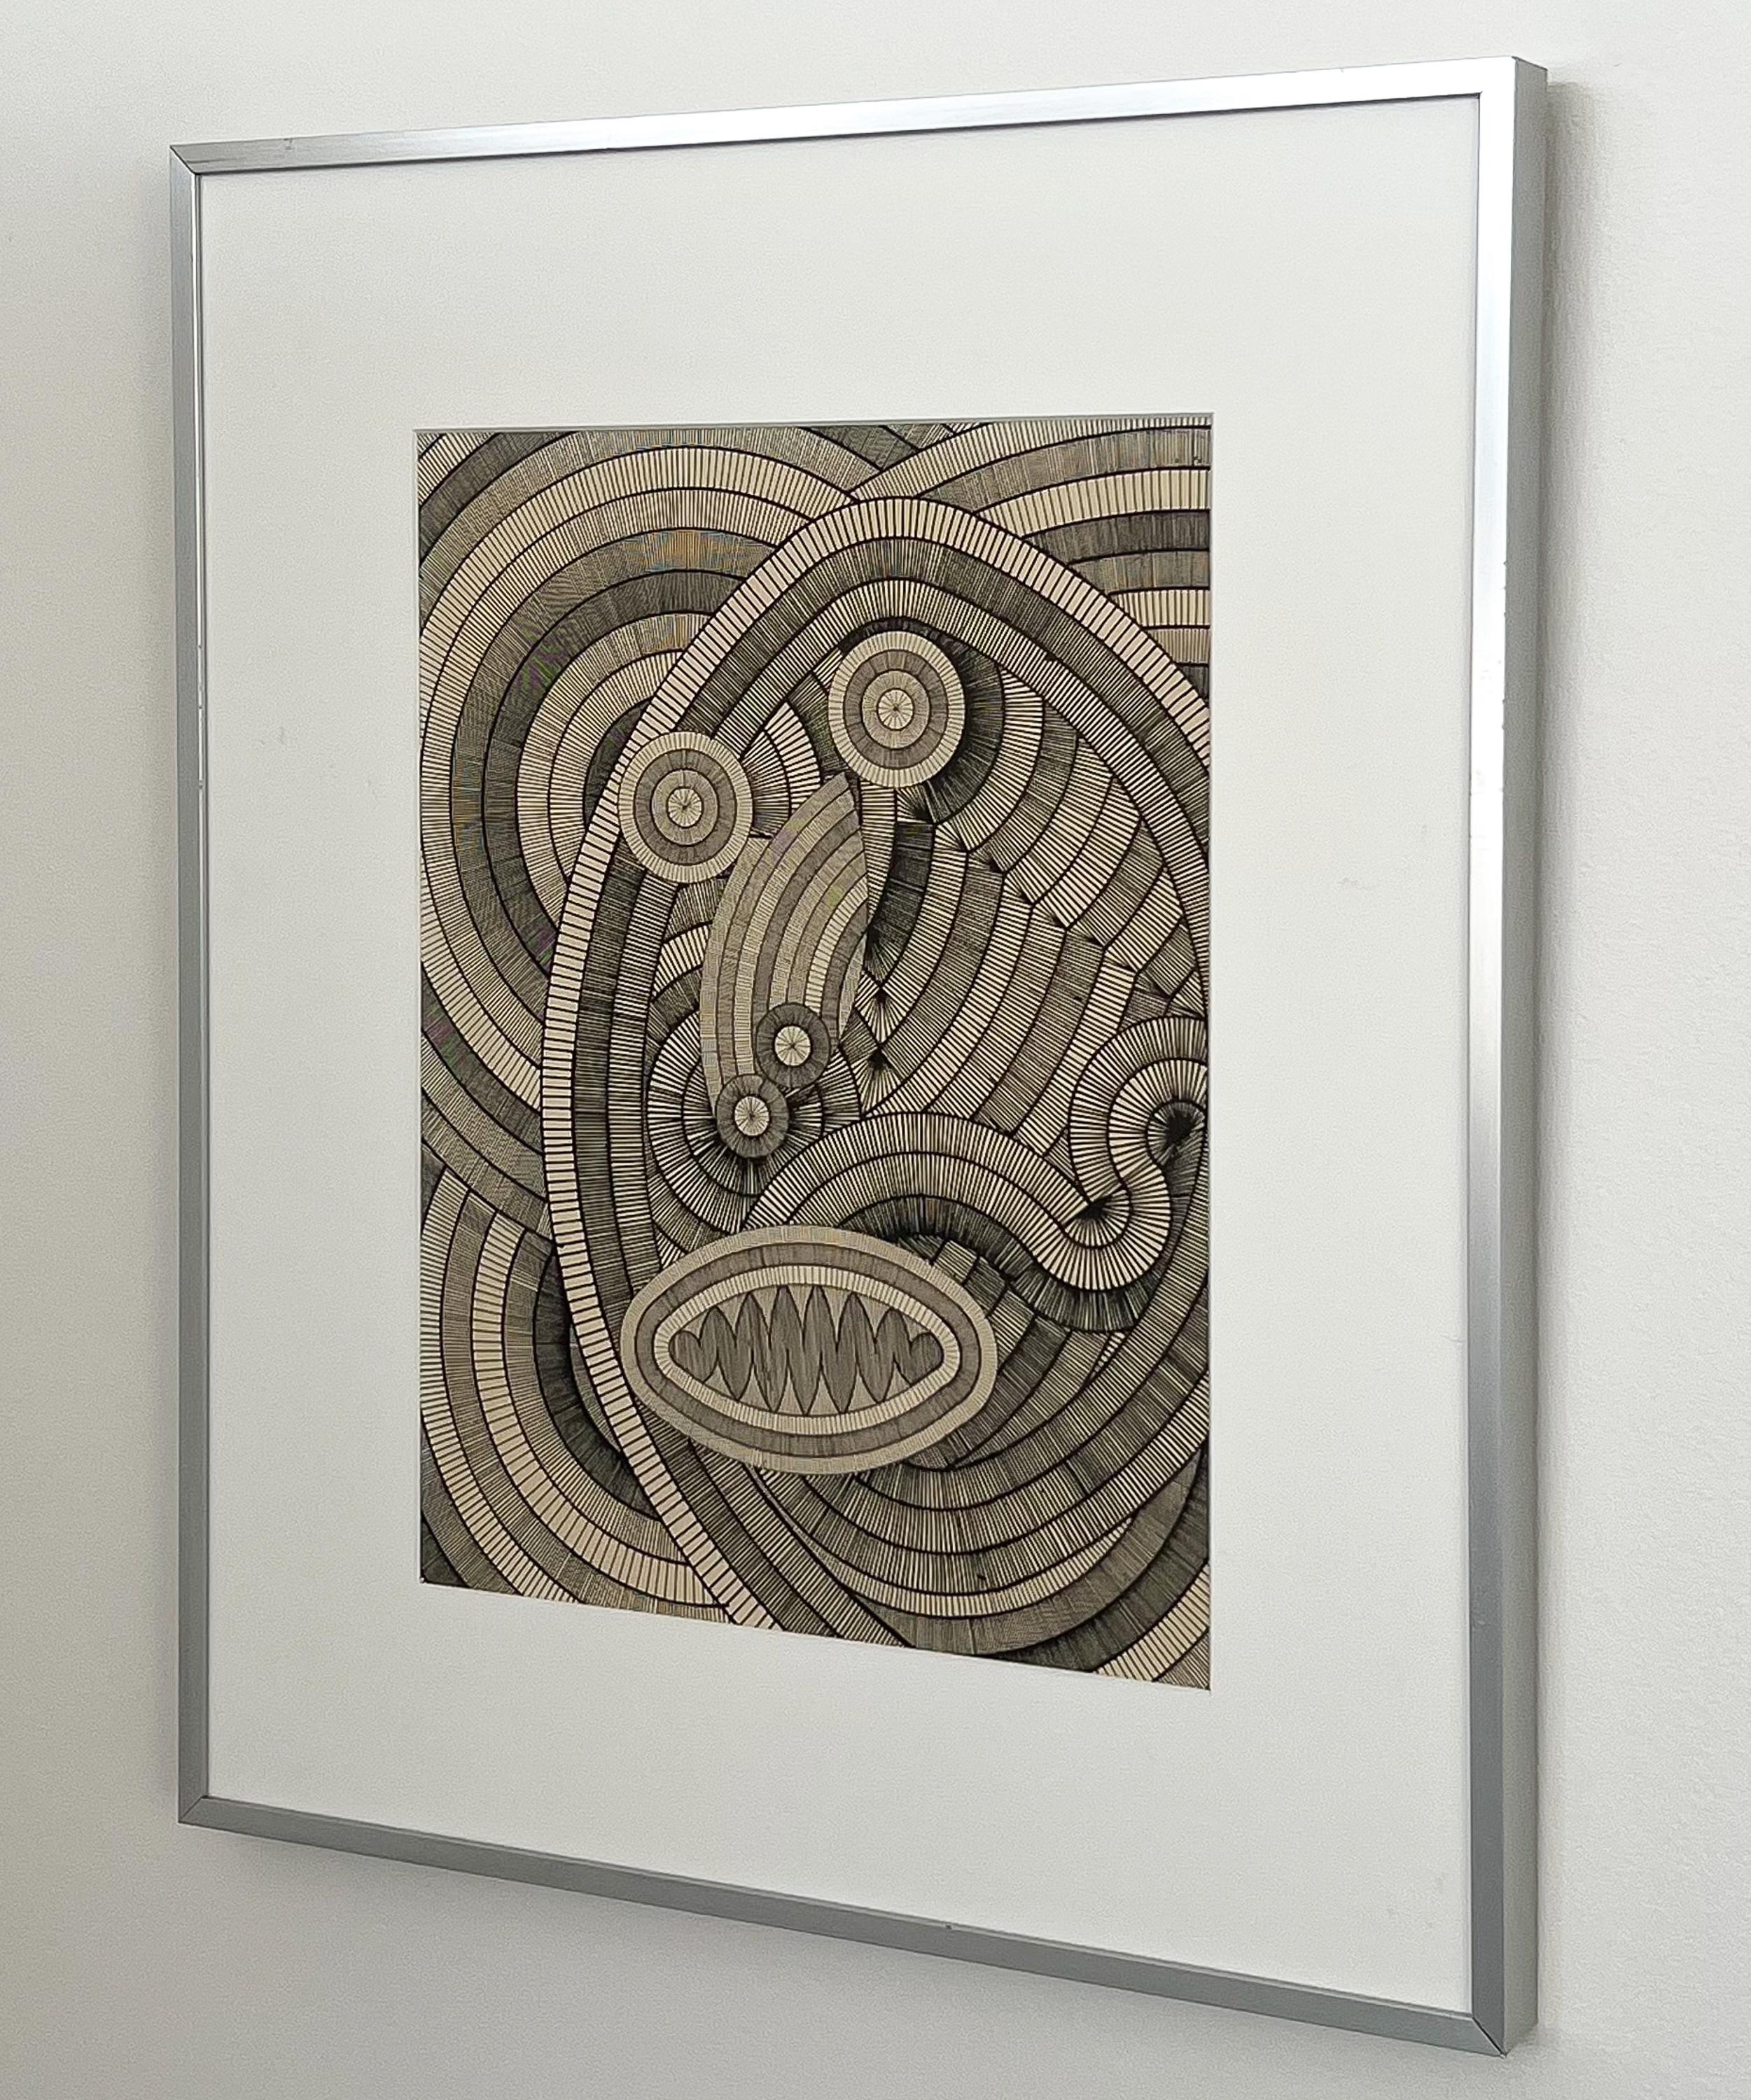 Pierre-Francois Vaysse framed modern abstract drawing, Belgium circa 1970. Intricate ink drawing on paper of abstract / surreal anthropomorphic figure / face. Black ink on beige background. Newly matted in white within the original aluminum frame